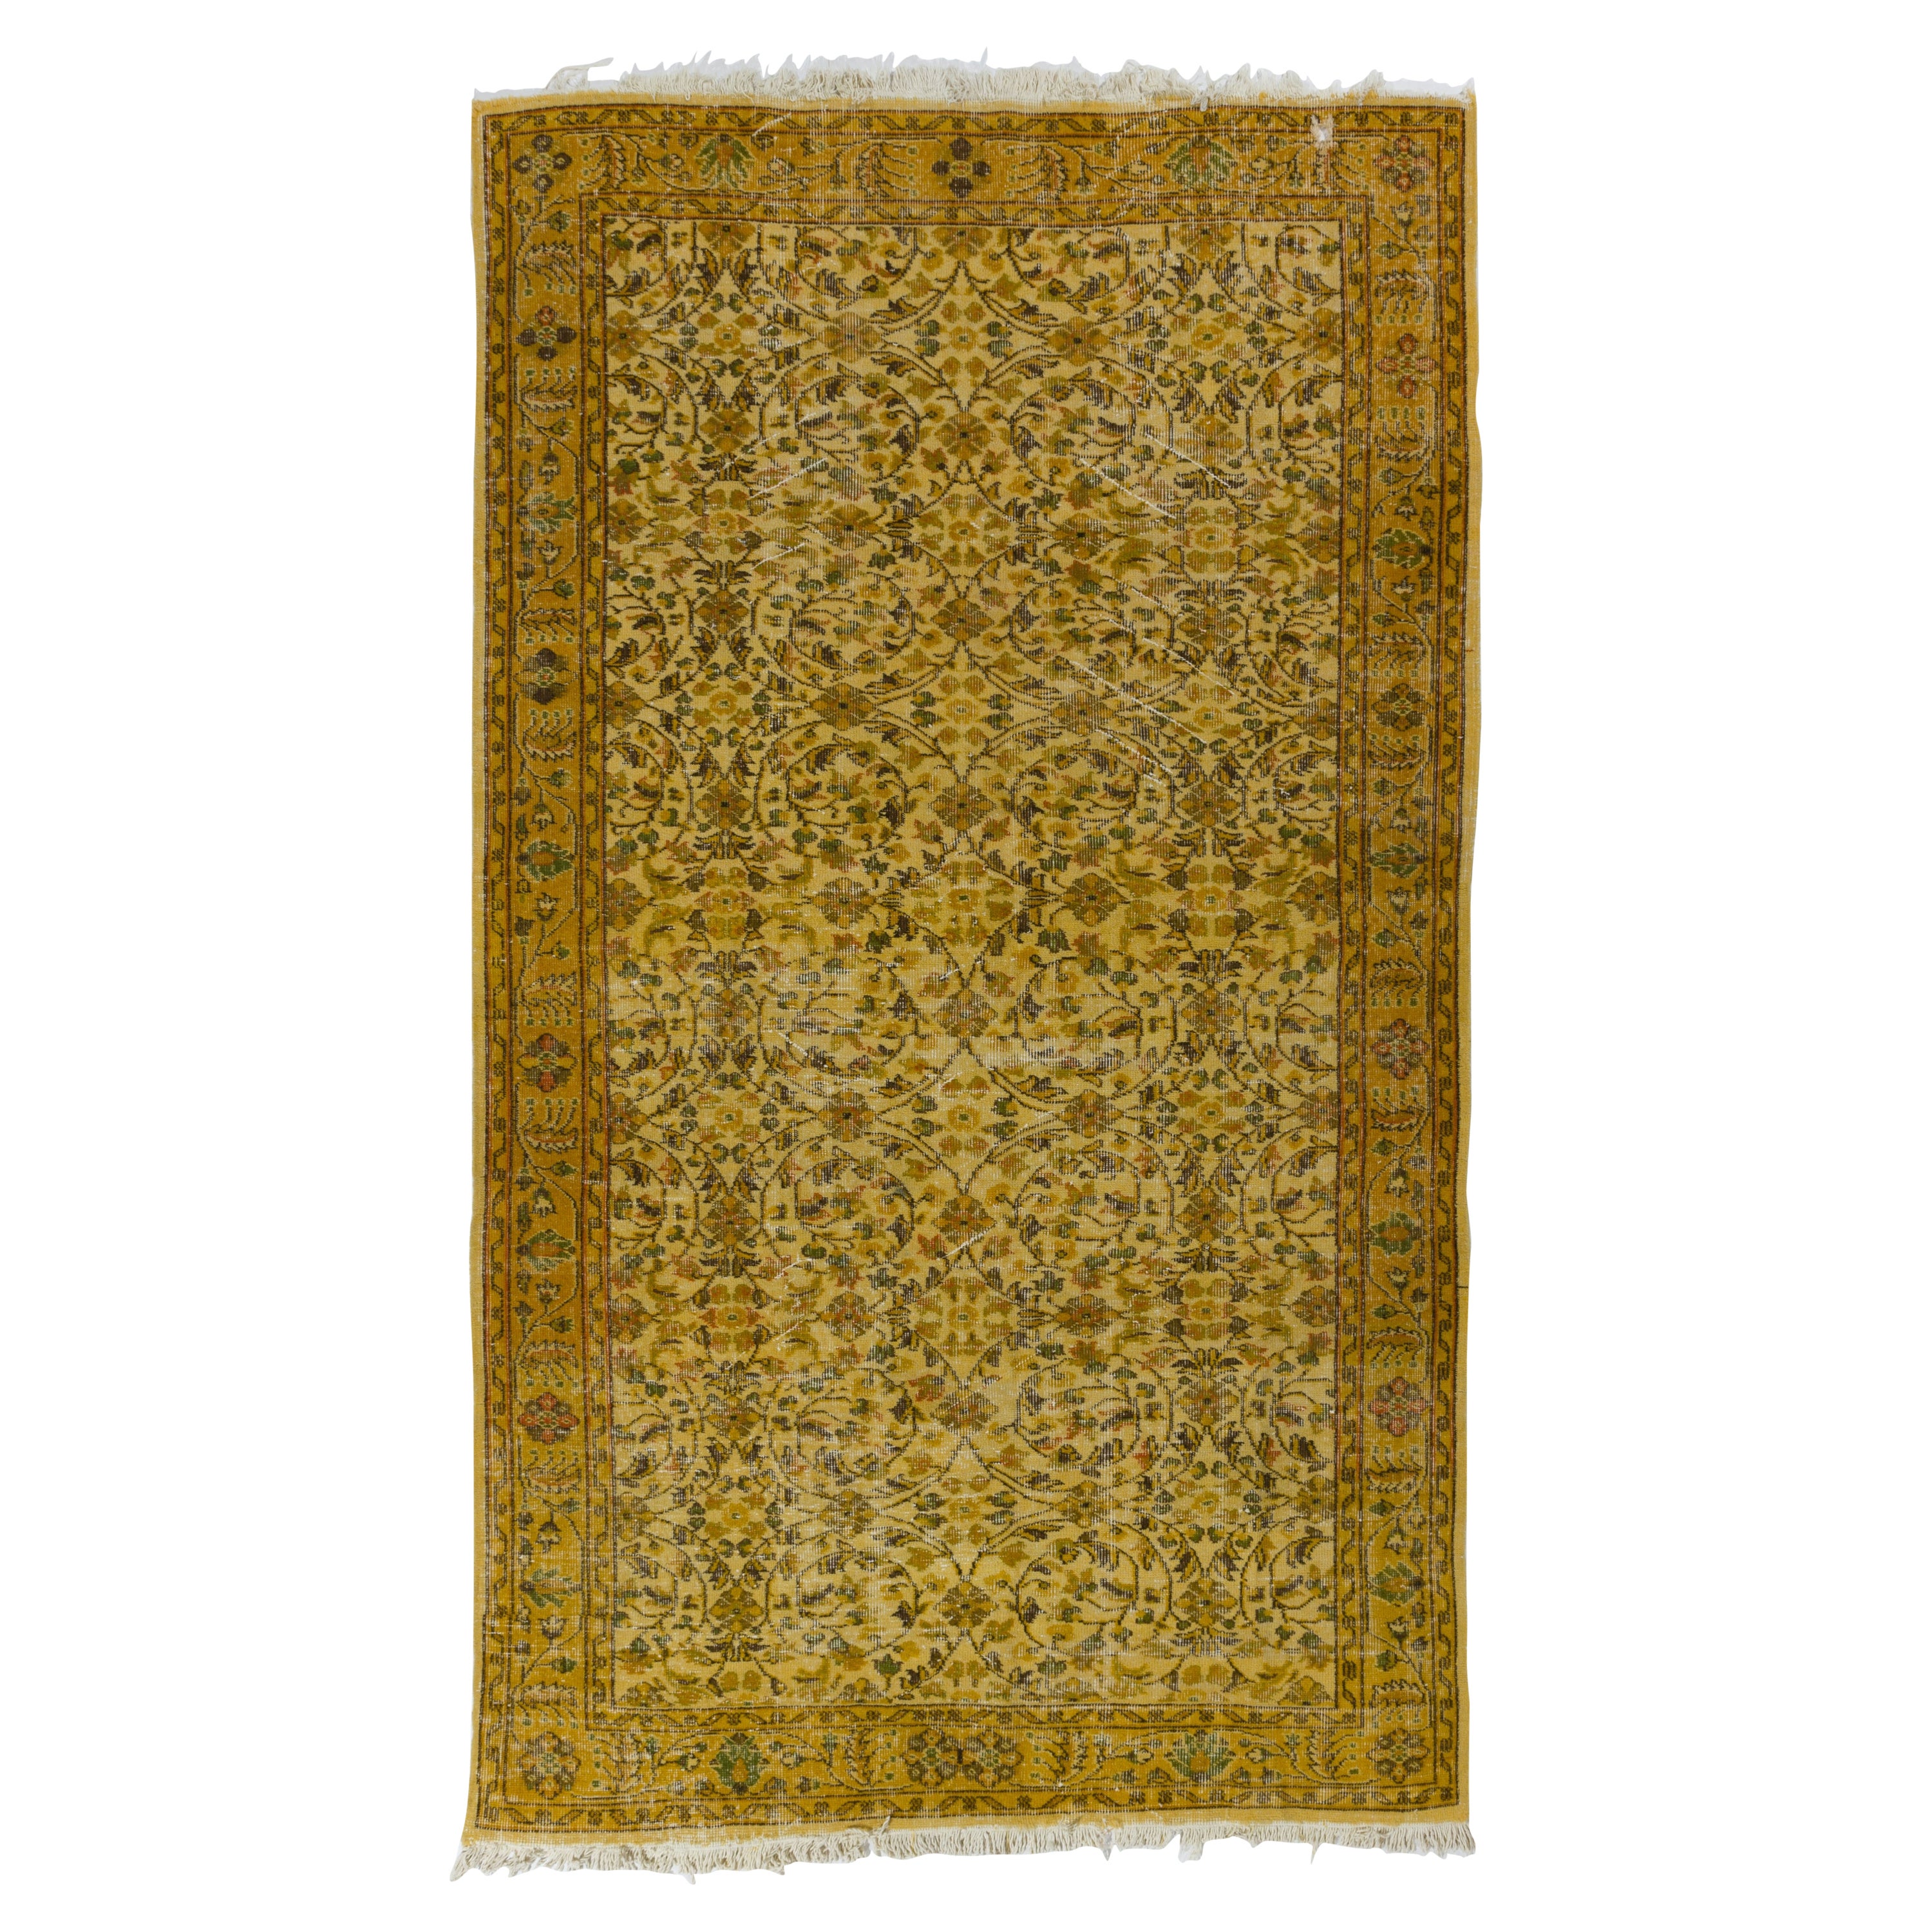 5.3x9 Ft Vintage Floral Handmade Turkish Rug in Yellow, Room Size Modern Carpet For Sale